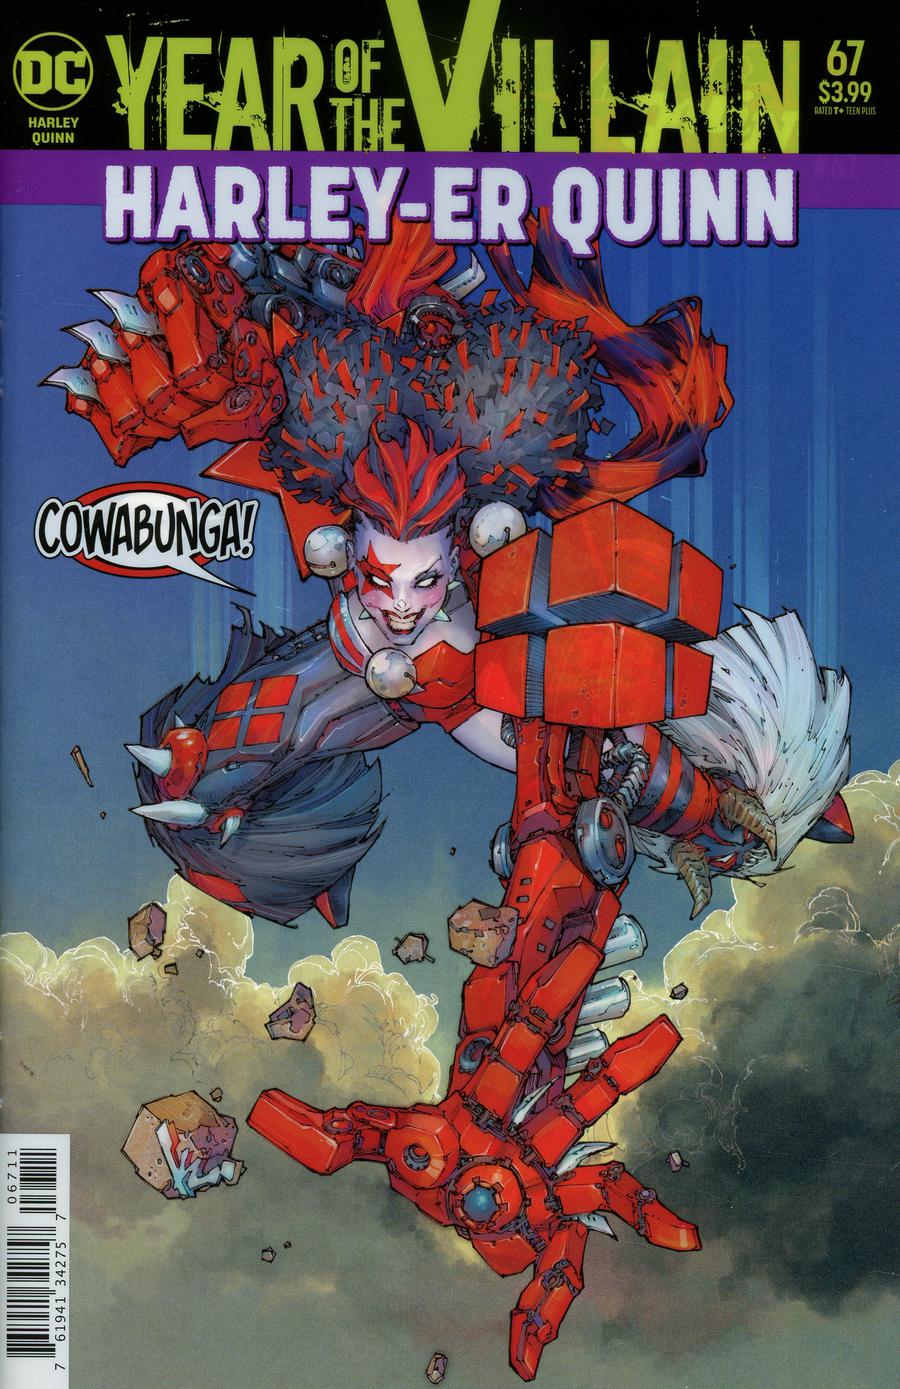 Harley Quinn Vol 3 #67 Cover A Regular Kenneth Rocafort Acetate Cover (Year Of The Villain Hostile Takeover Tie-In)